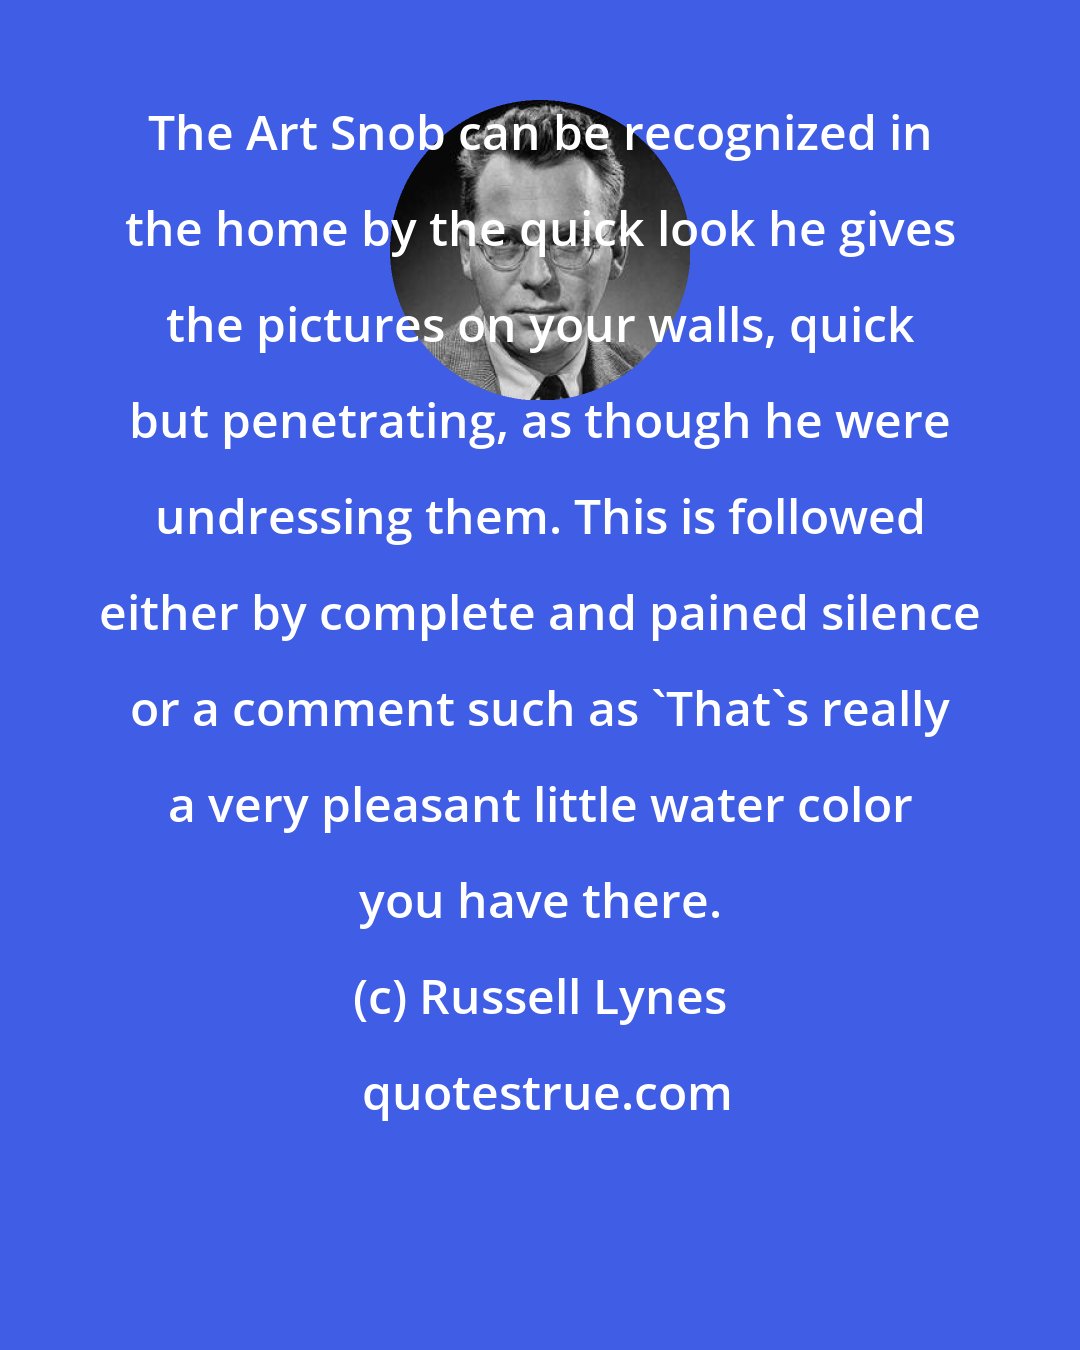 Russell Lynes: The Art Snob can be recognized in the home by the quick look he gives the pictures on your walls, quick but penetrating, as though he were undressing them. This is followed either by complete and pained silence or a comment such as 'That's really a very pleasant little water color you have there.